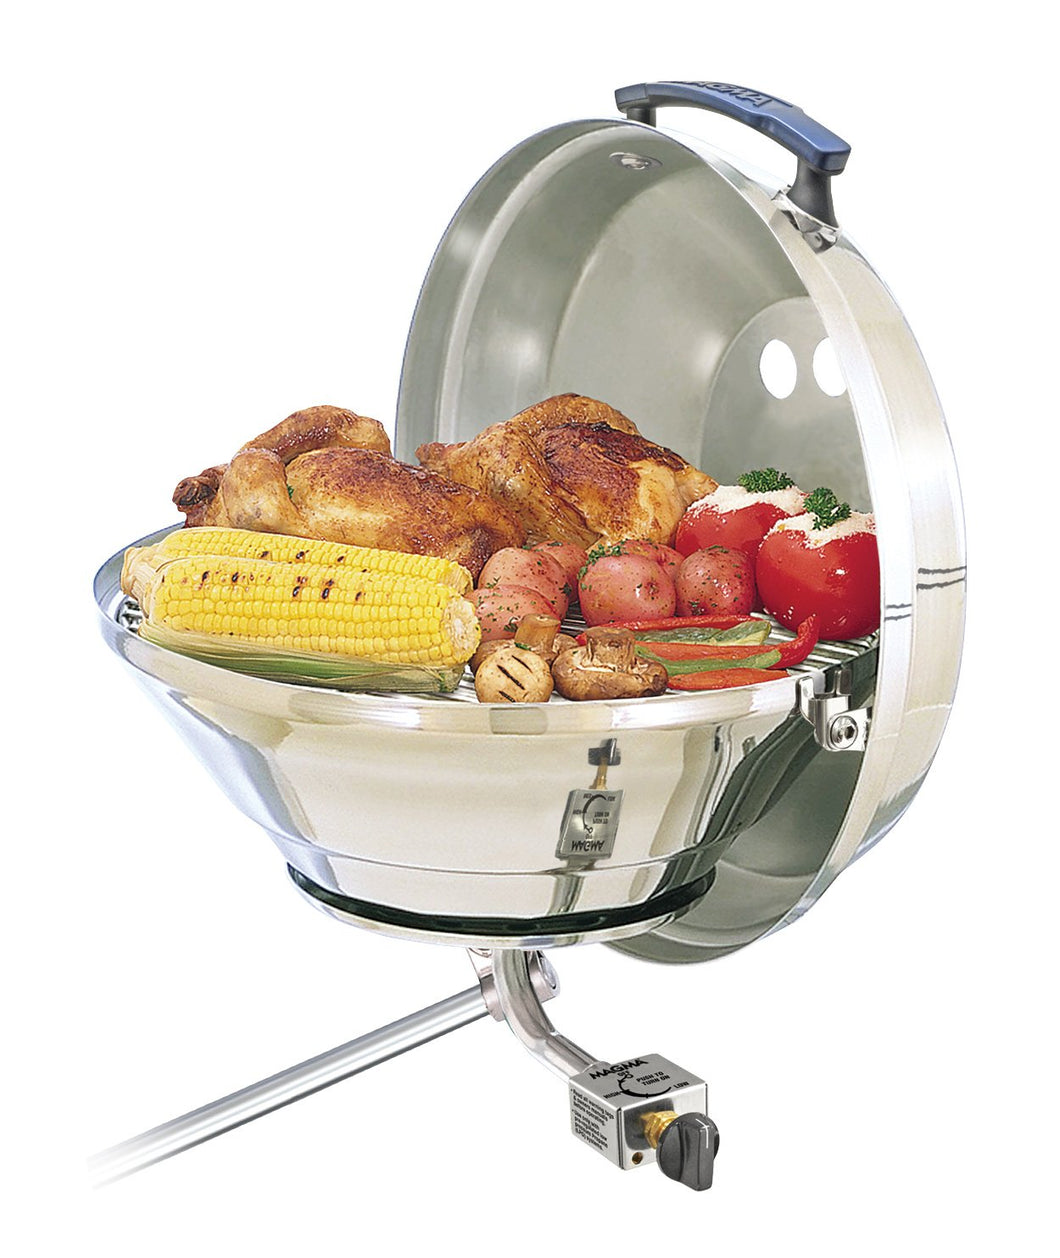 Original Marine Kettle grill rail mounted with grilled hamburgers, saugsages and vegetables